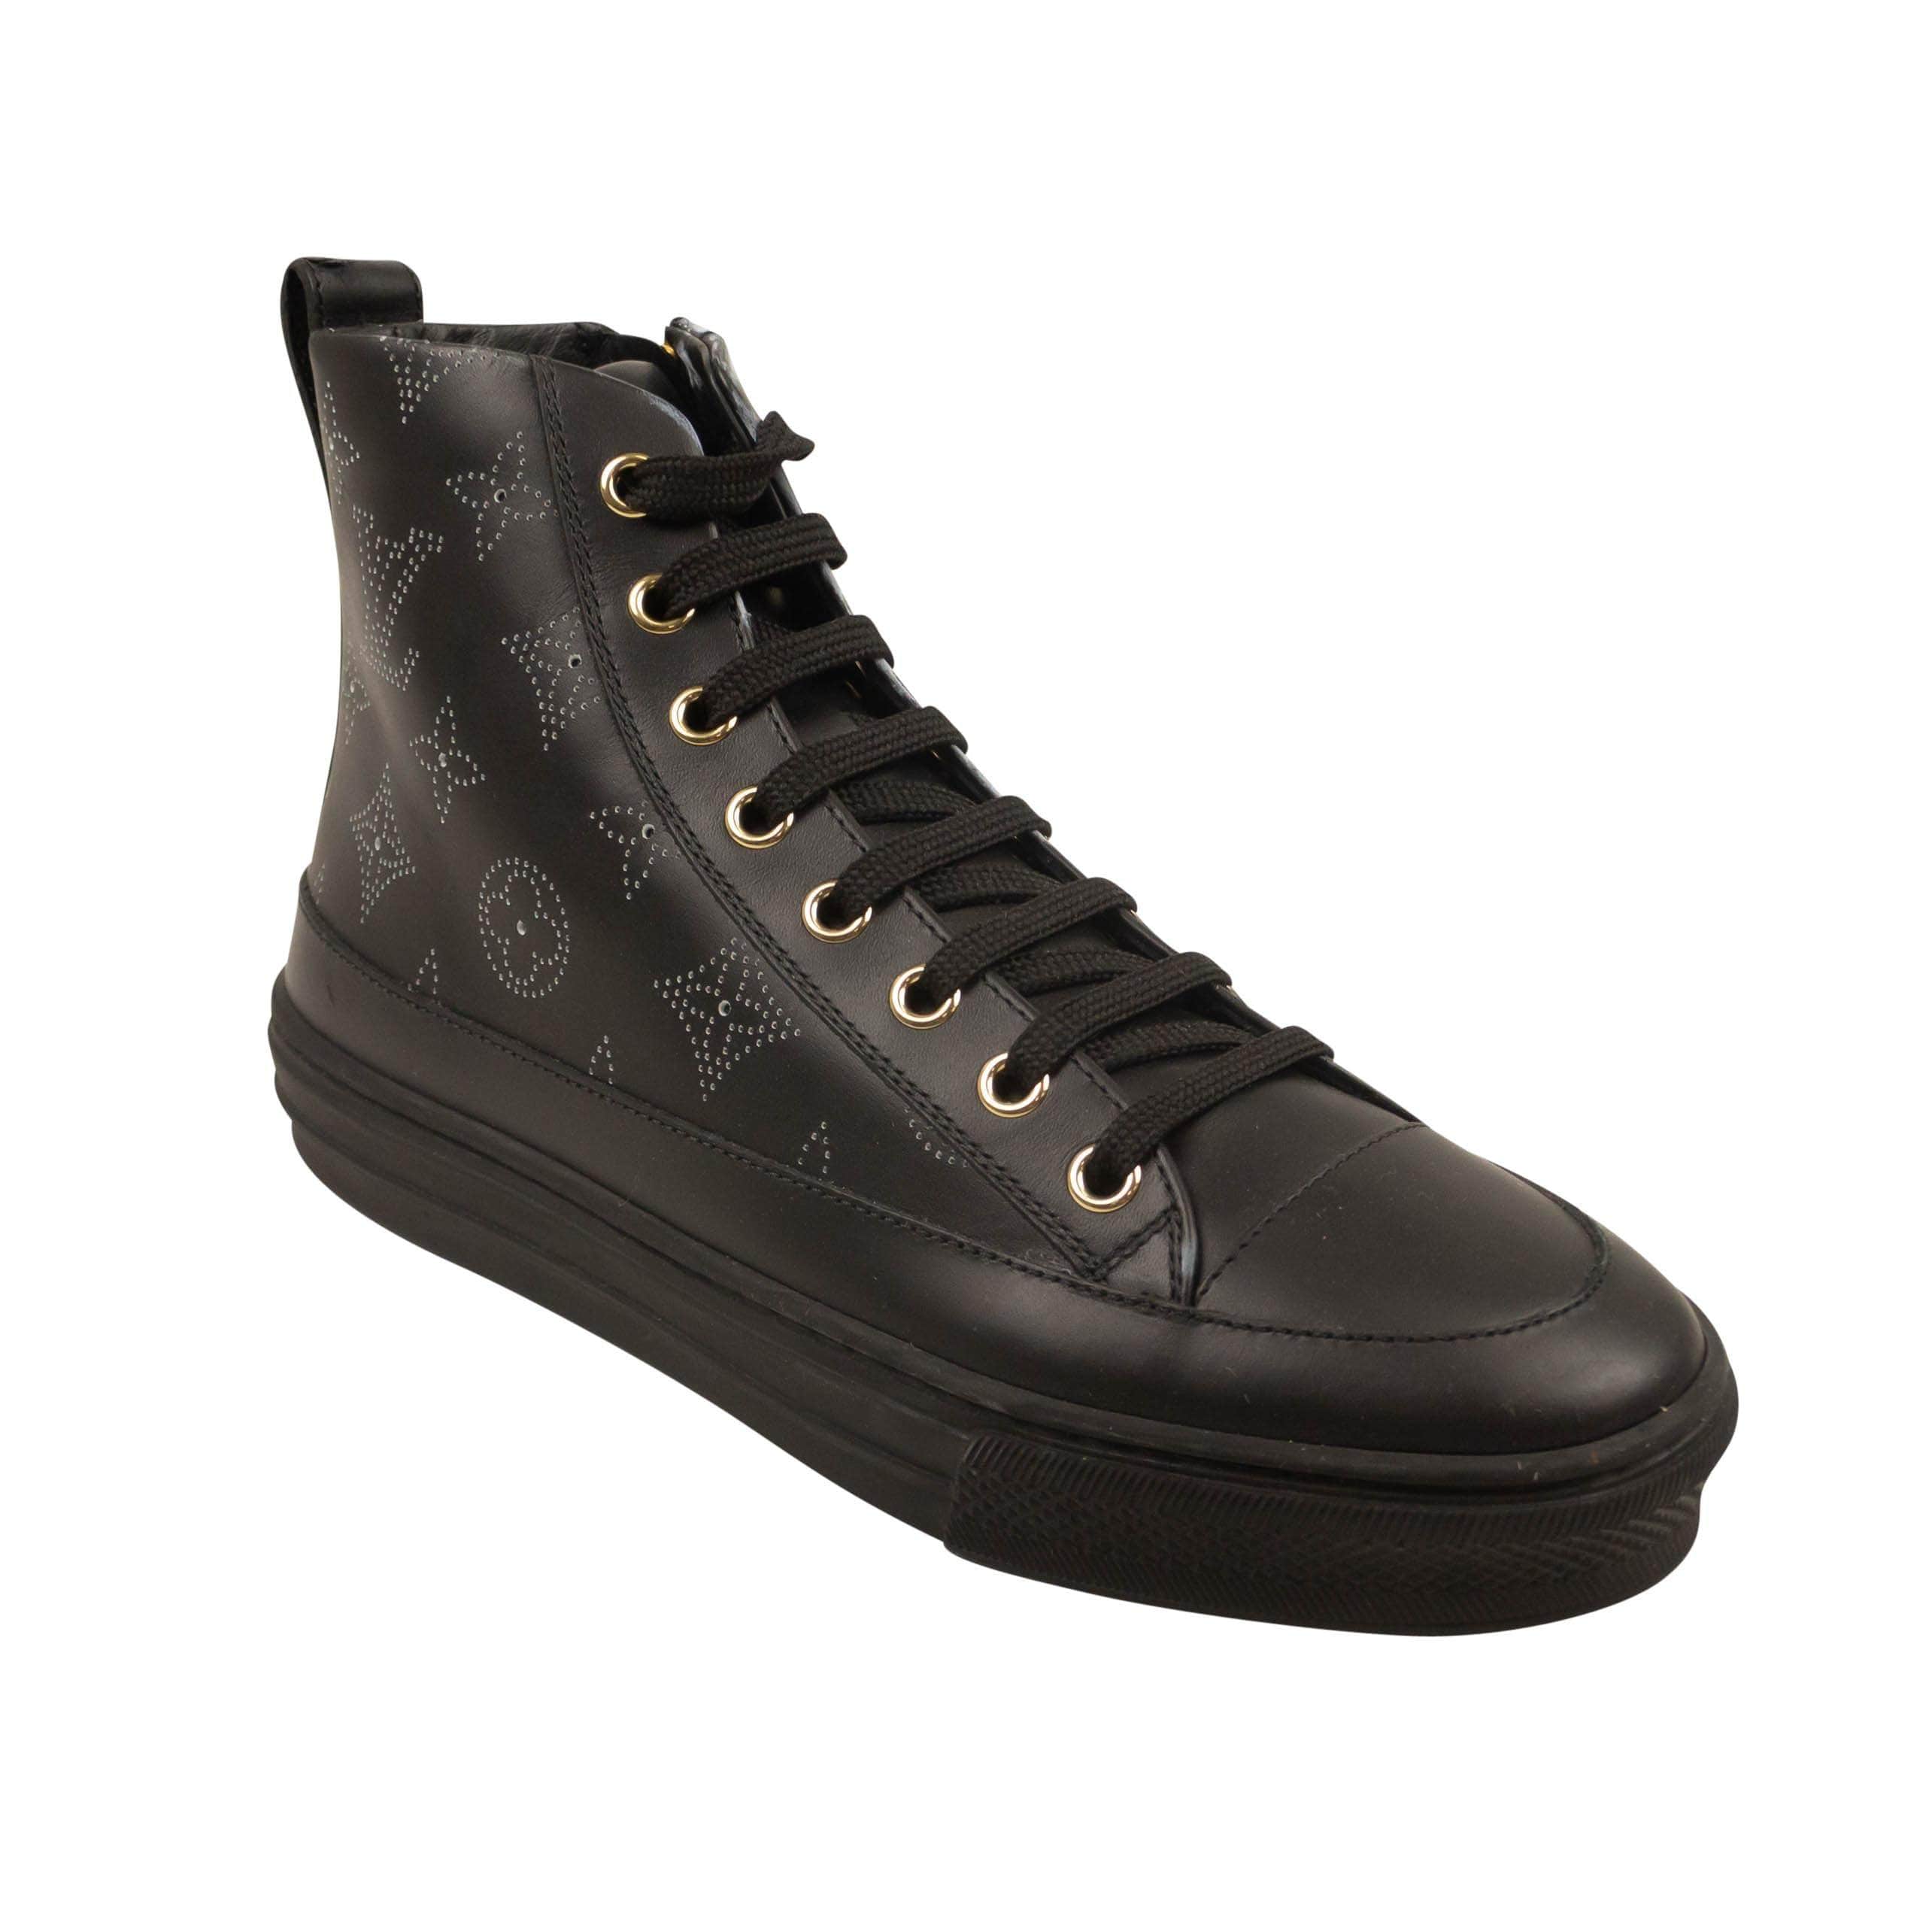 Louis Vuitton 500-750, channelenable-all, chicmi, couponcollection, gender-womens, main-shoes, size-35, SPO, stadiumgoods 35 Black Stellar Embossed Hi Top Sneakers 95-LVT-2009/35 95-LVT-2009/35